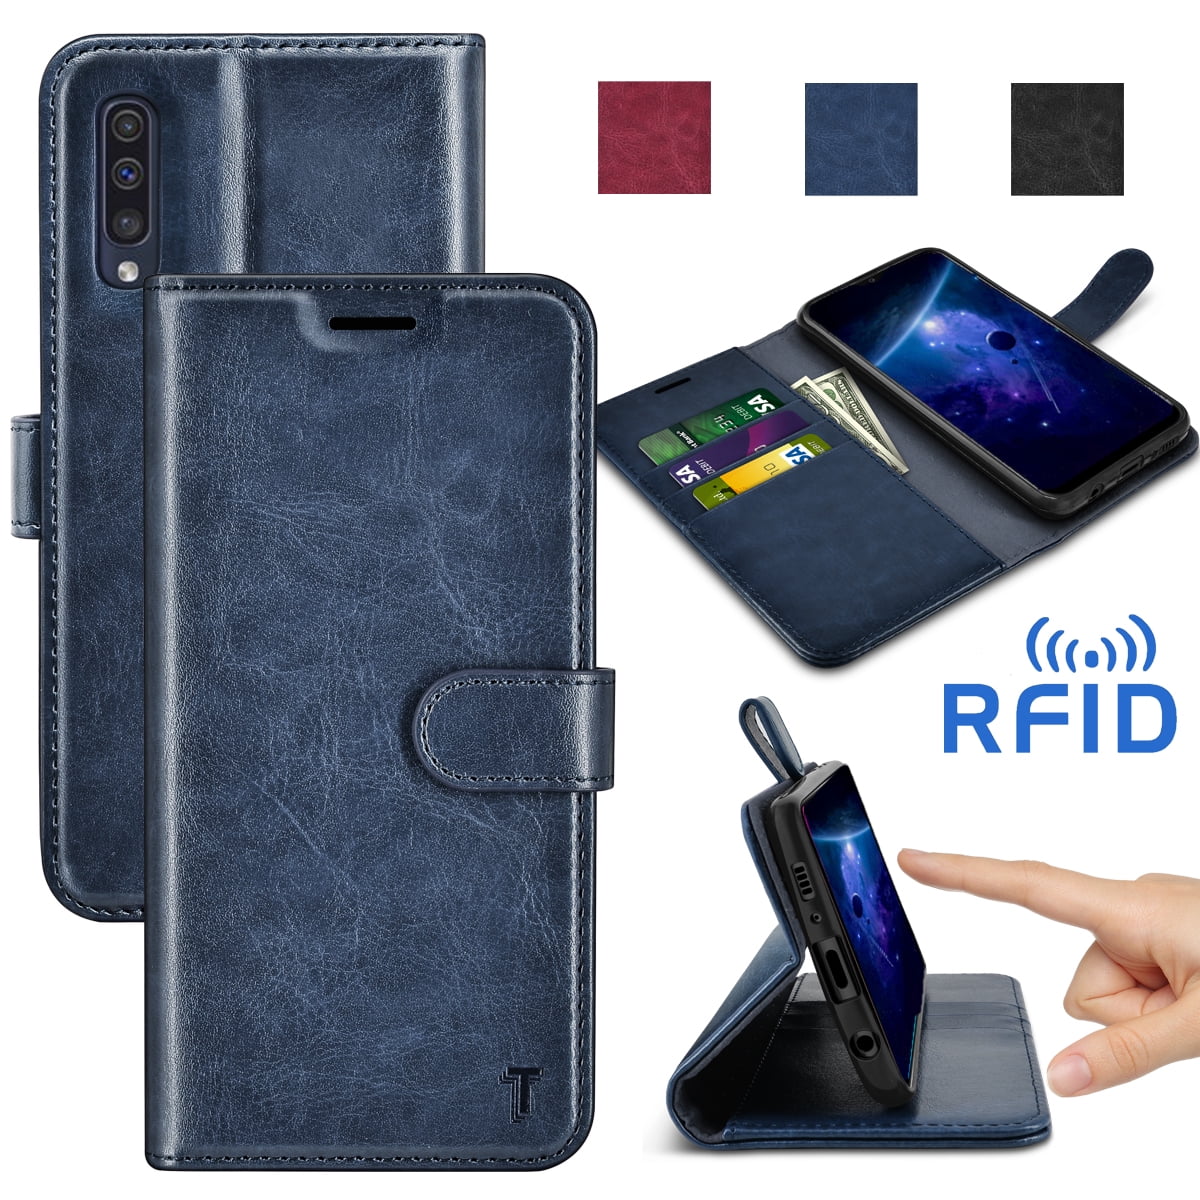 Samsung Galaxy A50 Wallet Case,Folio Flip Covers Kickstand Feature Leather Wallet Cases Magnetic Cover Card Slots Holder Slim TPU Shockproof Protective Shell,Blue 